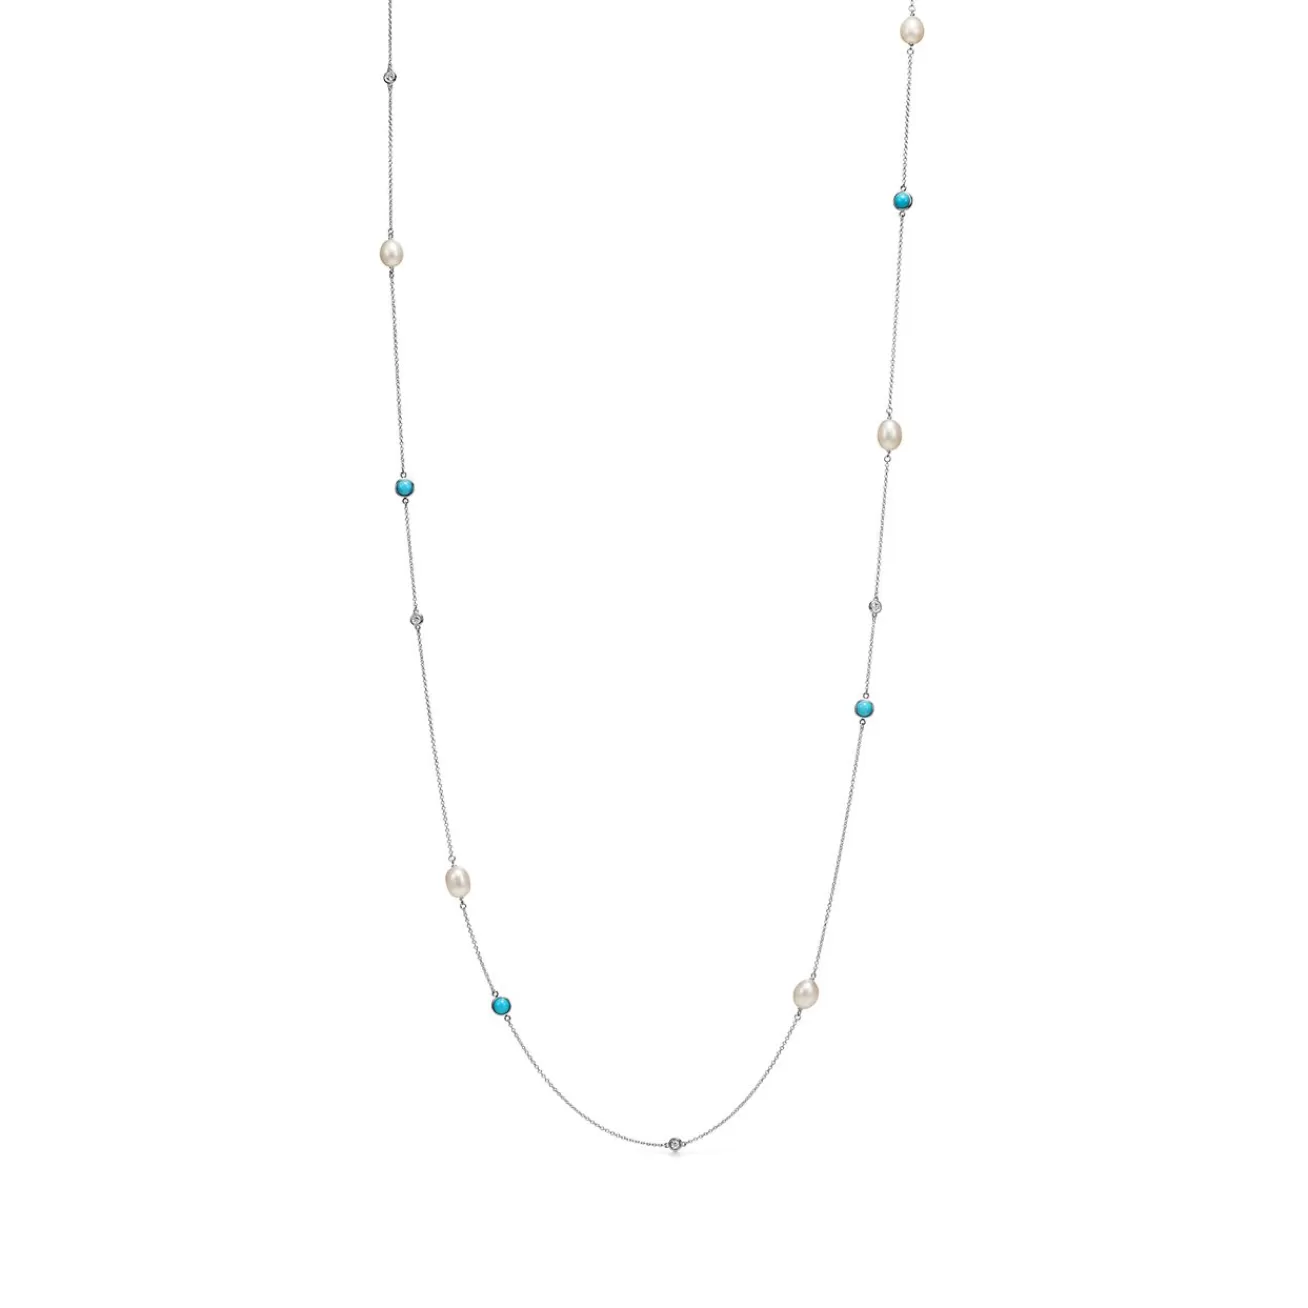 Tiffany & Co. Elsa Peretti® Color by the Yard sprinkle necklace in silver with turquoise. | ^ Necklaces & Pendants | Sterling Silver Jewelry